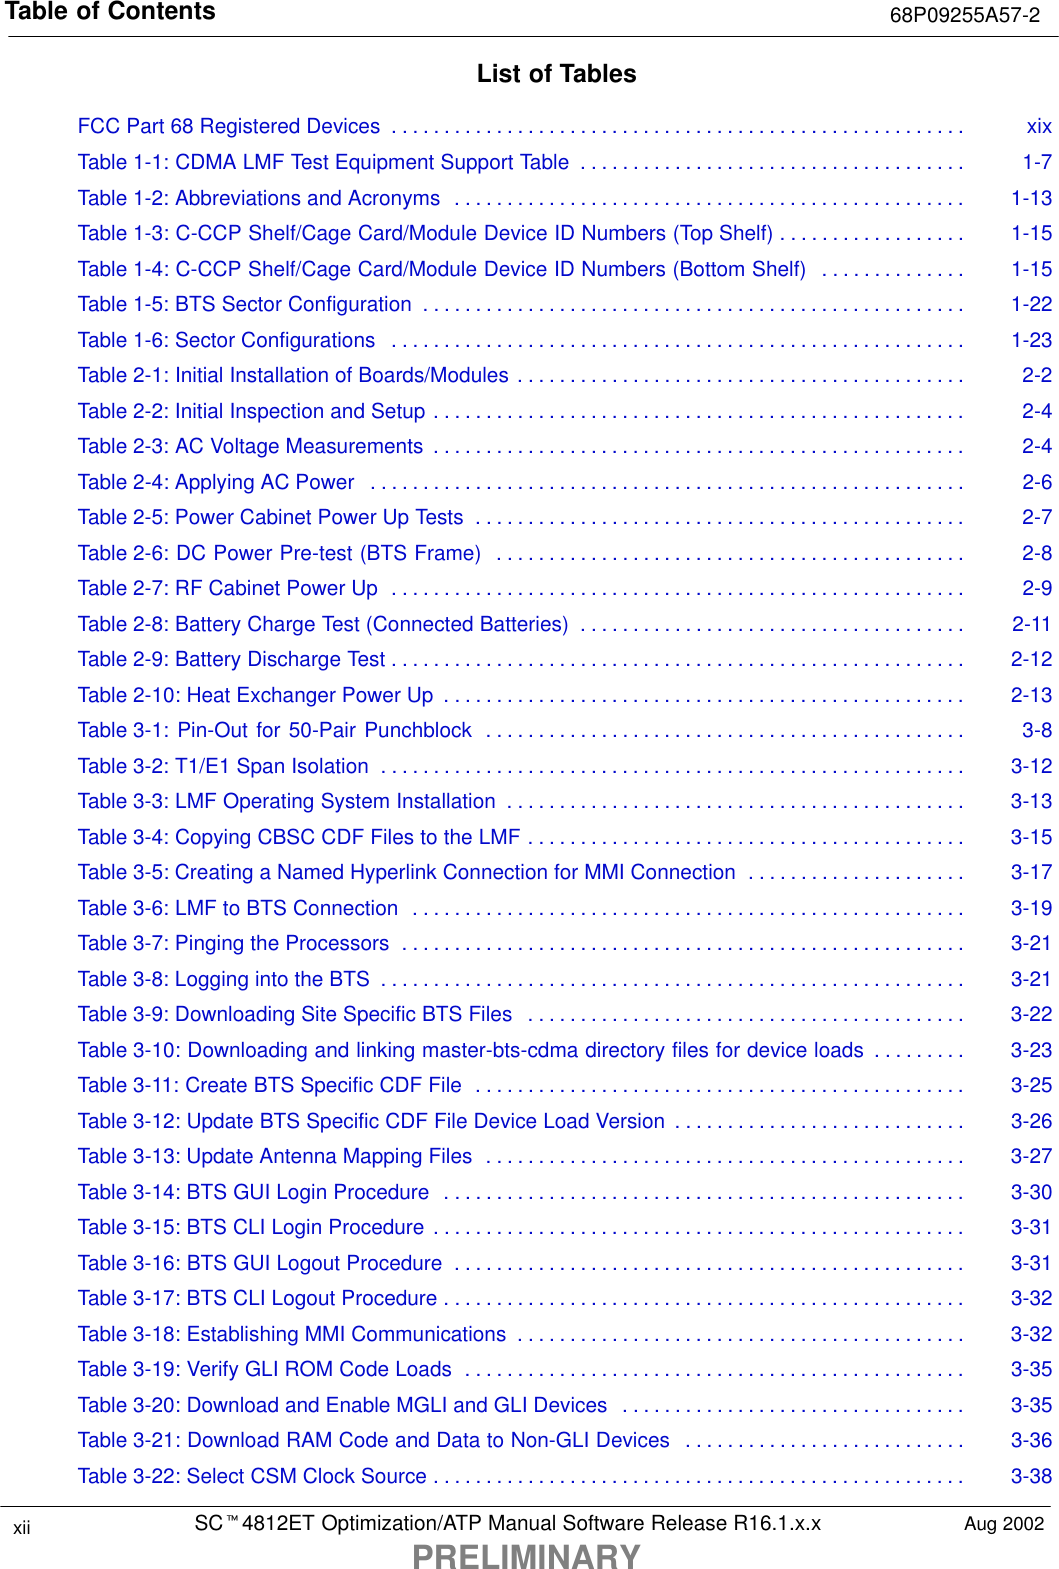 Table of Contents 68P09255A57-2SCt4812ET Optimization/ATP Manual Software Release R16.1.x.xPRELIMINARYxii Aug 2002List of TablesFCC Part 68 Registered Devices xix. . . . . . . . . . . . . . . . . . . . . . . . . . . . . . . . . . . . . . . . . . . . . . . . . . . . . . . Table 1-1: CDMA LMF Test Equipment Support Table 1-7. . . . . . . . . . . . . . . . . . . . . . . . . . . . . . . . . . . . . Table 1-2: Abbreviations and Acronyms 1-13. . . . . . . . . . . . . . . . . . . . . . . . . . . . . . . . . . . . . . . . . . . . . . . . . Table 1-3: C-CCP Shelf/Cage Card/Module Device ID Numbers (Top Shelf) 1-15. . . . . . . . . . . . . . . . . . Table 1-4: C-CCP Shelf/Cage Card/Module Device ID Numbers (Bottom Shelf) 1-15. . . . . . . . . . . . . . Table 1-5: BTS Sector Configuration 1-22. . . . . . . . . . . . . . . . . . . . . . . . . . . . . . . . . . . . . . . . . . . . . . . . . . . . Table 1-6: Sector Configurations 1-23. . . . . . . . . . . . . . . . . . . . . . . . . . . . . . . . . . . . . . . . . . . . . . . . . . . . . . . Table 2-1: Initial Installation of Boards/Modules 2-2. . . . . . . . . . . . . . . . . . . . . . . . . . . . . . . . . . . . . . . . . . . Table 2-2: Initial Inspection and Setup 2-4. . . . . . . . . . . . . . . . . . . . . . . . . . . . . . . . . . . . . . . . . . . . . . . . . . . Table 2-3: AC Voltage Measurements 2-4. . . . . . . . . . . . . . . . . . . . . . . . . . . . . . . . . . . . . . . . . . . . . . . . . . . Table 2-4: Applying AC Power 2-6. . . . . . . . . . . . . . . . . . . . . . . . . . . . . . . . . . . . . . . . . . . . . . . . . . . . . . . . . Table 2-5: Power Cabinet Power Up Tests 2-7. . . . . . . . . . . . . . . . . . . . . . . . . . . . . . . . . . . . . . . . . . . . . . . Table 2-6: DC Power Pre-test (BTS Frame) 2-8. . . . . . . . . . . . . . . . . . . . . . . . . . . . . . . . . . . . . . . . . . . . . Table 2-7: RF Cabinet Power Up 2-9. . . . . . . . . . . . . . . . . . . . . . . . . . . . . . . . . . . . . . . . . . . . . . . . . . . . . . . Table 2-8: Battery Charge Test (Connected Batteries) 2-11. . . . . . . . . . . . . . . . . . . . . . . . . . . . . . . . . . . . . Table 2-9: Battery Discharge Test 2-12. . . . . . . . . . . . . . . . . . . . . . . . . . . . . . . . . . . . . . . . . . . . . . . . . . . . . . . Table 2-10: Heat Exchanger Power Up 2-13. . . . . . . . . . . . . . . . . . . . . . . . . . . . . . . . . . . . . . . . . . . . . . . . . . Table 3-1: Pin-Out for 50-Pair Punchblock 3-8. . . . . . . . . . . . . . . . . . . . . . . . . . . . . . . . . . . . . . . . . . . . . . Table 3-2: T1/E1 Span Isolation 3-12. . . . . . . . . . . . . . . . . . . . . . . . . . . . . . . . . . . . . . . . . . . . . . . . . . . . . . . . Table 3-3: LMF Operating System Installation 3-13. . . . . . . . . . . . . . . . . . . . . . . . . . . . . . . . . . . . . . . . . . . . Table 3-4: Copying CBSC CDF Files to the LMF 3-15. . . . . . . . . . . . . . . . . . . . . . . . . . . . . . . . . . . . . . . . . . Table 3-5: Creating a Named Hyperlink Connection for MMI Connection 3-17. . . . . . . . . . . . . . . . . . . . . Table 3-6: LMF to BTS Connection 3-19. . . . . . . . . . . . . . . . . . . . . . . . . . . . . . . . . . . . . . . . . . . . . . . . . . . . . Table 3-7: Pinging the Processors 3-21. . . . . . . . . . . . . . . . . . . . . . . . . . . . . . . . . . . . . . . . . . . . . . . . . . . . . . Table 3-8: Logging into the BTS 3-21. . . . . . . . . . . . . . . . . . . . . . . . . . . . . . . . . . . . . . . . . . . . . . . . . . . . . . . . Table 3-9: Downloading Site Specific BTS Files 3-22. . . . . . . . . . . . . . . . . . . . . . . . . . . . . . . . . . . . . . . . . . Table 3-10: Downloading and linking master-bts-cdma directory files for device loads 3-23. . . . . . . . . Table 3-11: Create BTS Specific CDF File 3-25. . . . . . . . . . . . . . . . . . . . . . . . . . . . . . . . . . . . . . . . . . . . . . . Table 3-12: Update BTS Specific CDF File Device Load Version 3-26. . . . . . . . . . . . . . . . . . . . . . . . . . . . Table 3-13: Update Antenna Mapping Files 3-27. . . . . . . . . . . . . . . . . . . . . . . . . . . . . . . . . . . . . . . . . . . . . . Table 3-14: BTS GUI Login Procedure 3-30. . . . . . . . . . . . . . . . . . . . . . . . . . . . . . . . . . . . . . . . . . . . . . . . . . Table 3-15: BTS CLI Login Procedure 3-31. . . . . . . . . . . . . . . . . . . . . . . . . . . . . . . . . . . . . . . . . . . . . . . . . . . Table 3-16: BTS GUI Logout Procedure 3-31. . . . . . . . . . . . . . . . . . . . . . . . . . . . . . . . . . . . . . . . . . . . . . . . . Table 3-17: BTS CLI Logout Procedure 3-32. . . . . . . . . . . . . . . . . . . . . . . . . . . . . . . . . . . . . . . . . . . . . . . . . . Table 3-18: Establishing MMI Communications 3-32. . . . . . . . . . . . . . . . . . . . . . . . . . . . . . . . . . . . . . . . . . . Table 3-19: Verify GLI ROM Code Loads 3-35. . . . . . . . . . . . . . . . . . . . . . . . . . . . . . . . . . . . . . . . . . . . . . . . Table 3-20: Download and Enable MGLI and GLI Devices 3-35. . . . . . . . . . . . . . . . . . . . . . . . . . . . . . . . . Table 3-21: Download RAM Code and Data to Non-GLI Devices 3-36. . . . . . . . . . . . . . . . . . . . . . . . . . . Table 3-22: Select CSM Clock Source 3-38. . . . . . . . . . . . . . . . . . . . . . . . . . . . . . . . . . . . . . . . . . . . . . . . . . . 